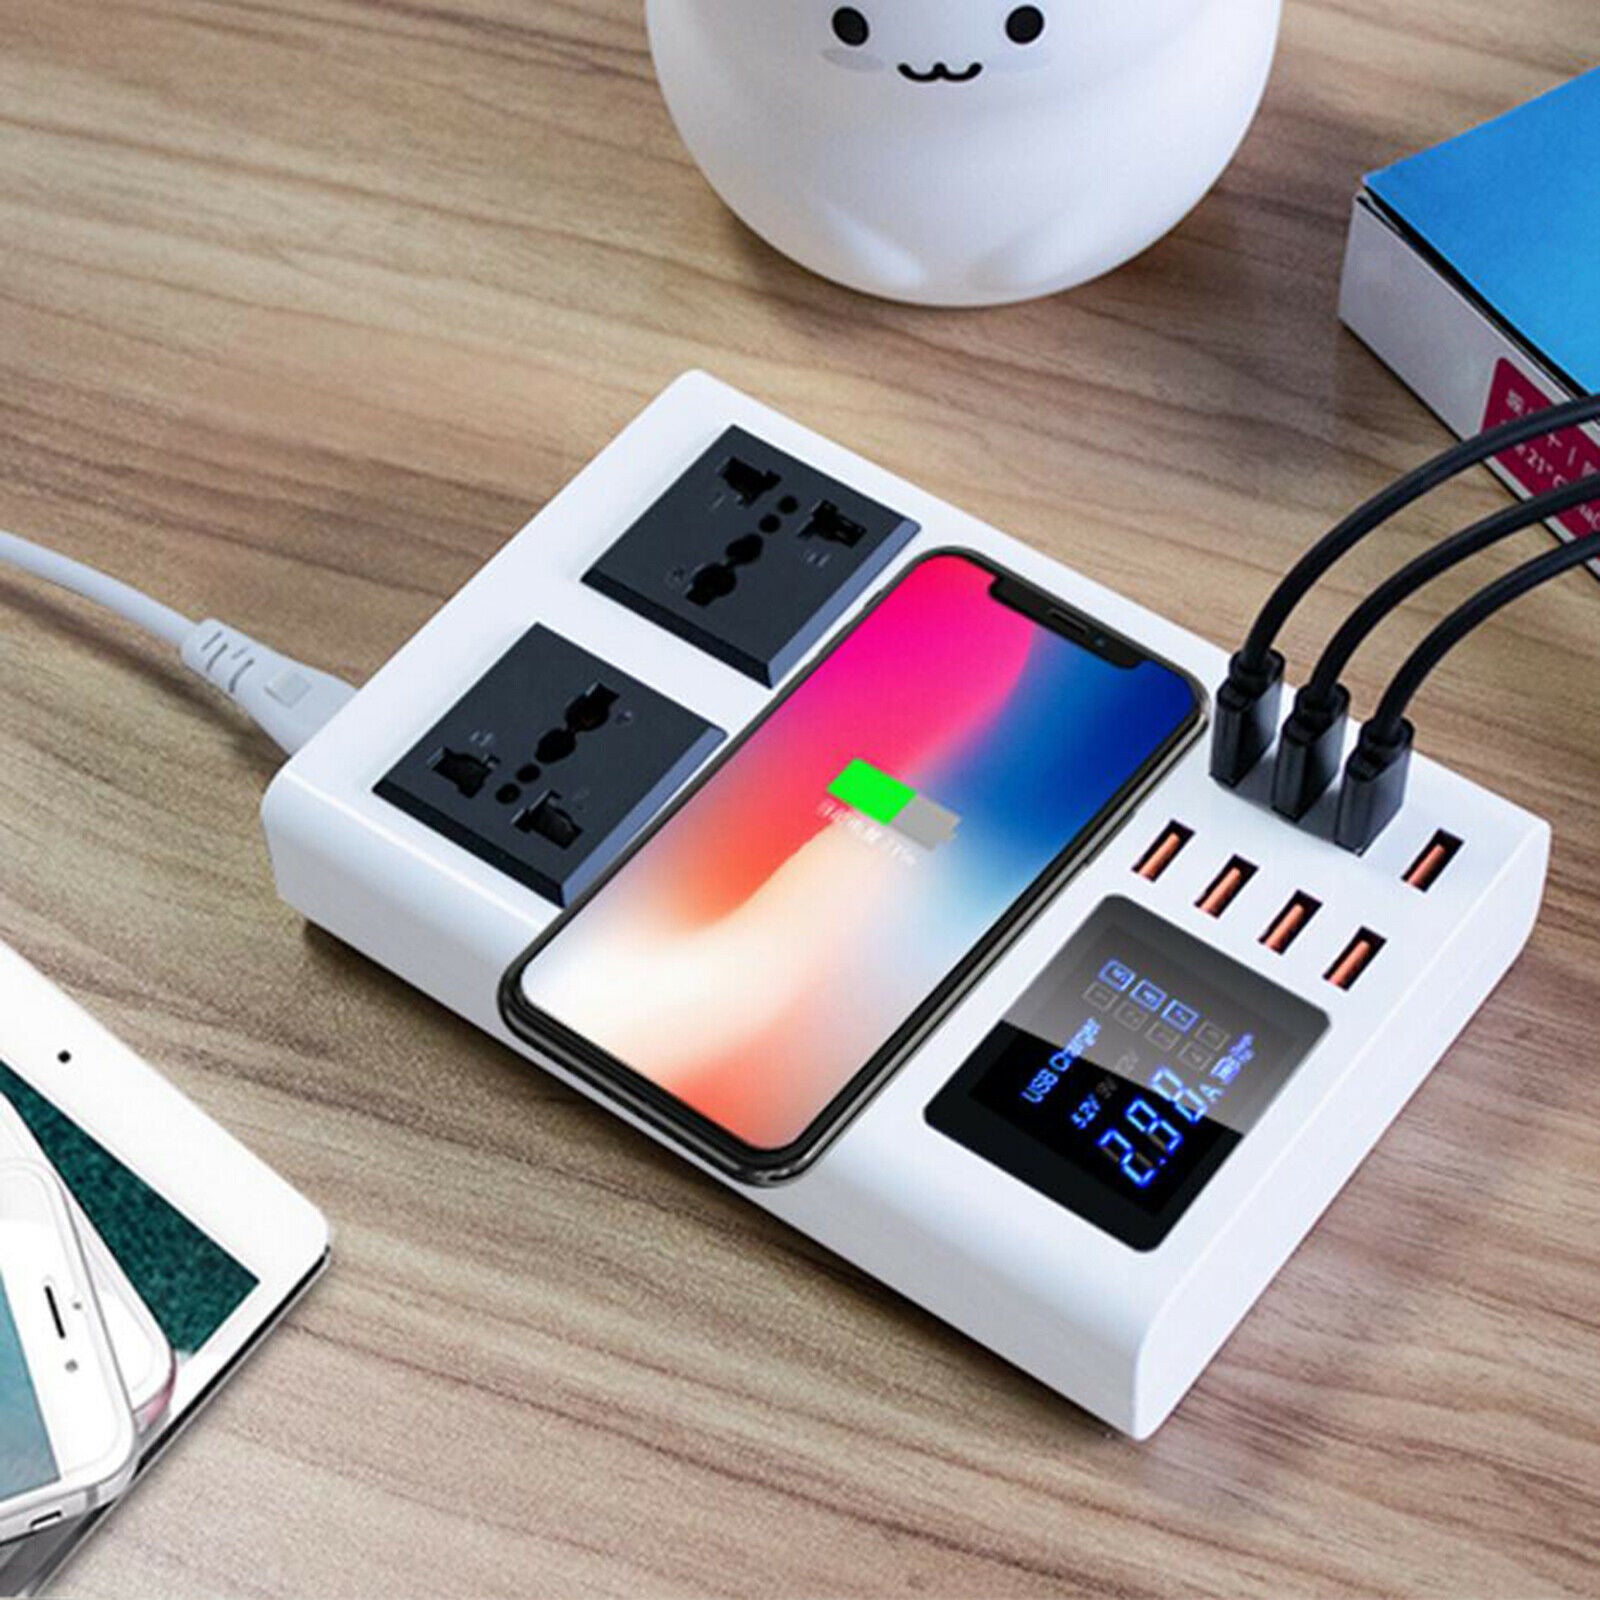 Multiple USB Charger 40W/8A 8-Port LCD Display for Smart Phones and More